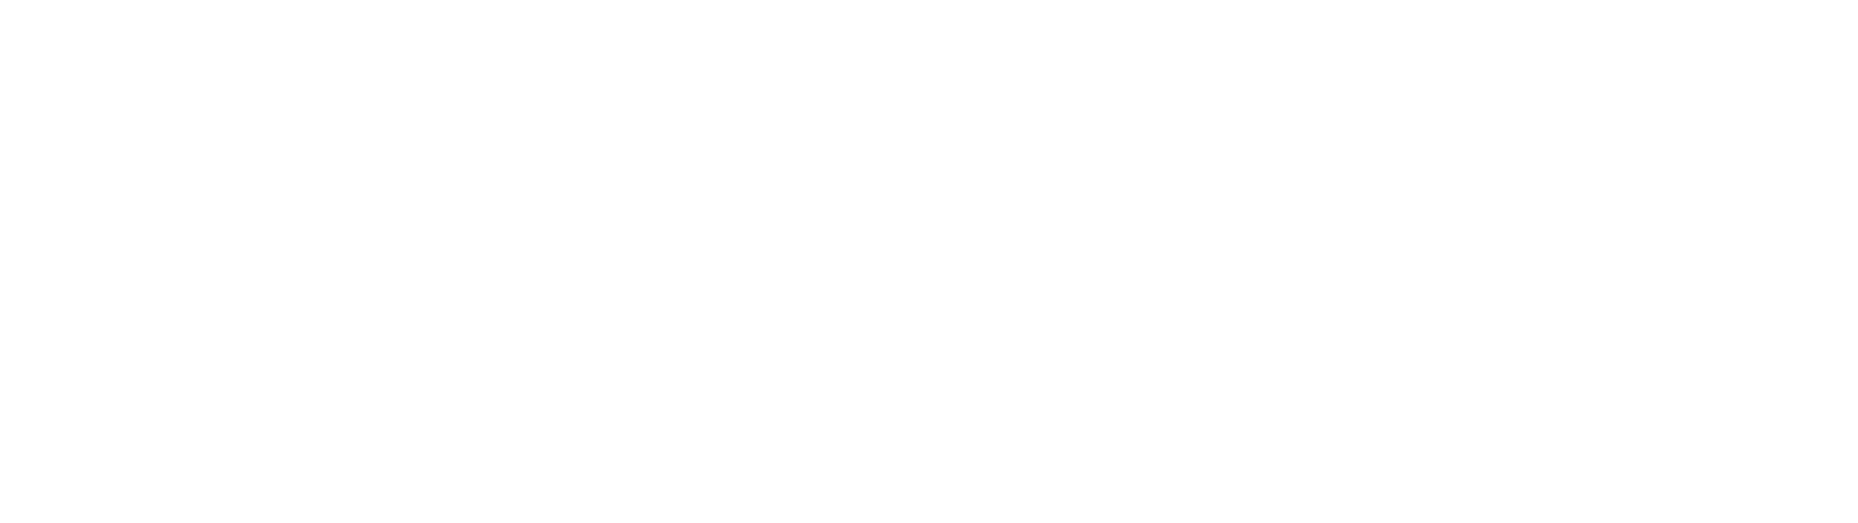 COUNTRY ROAD EVENTS